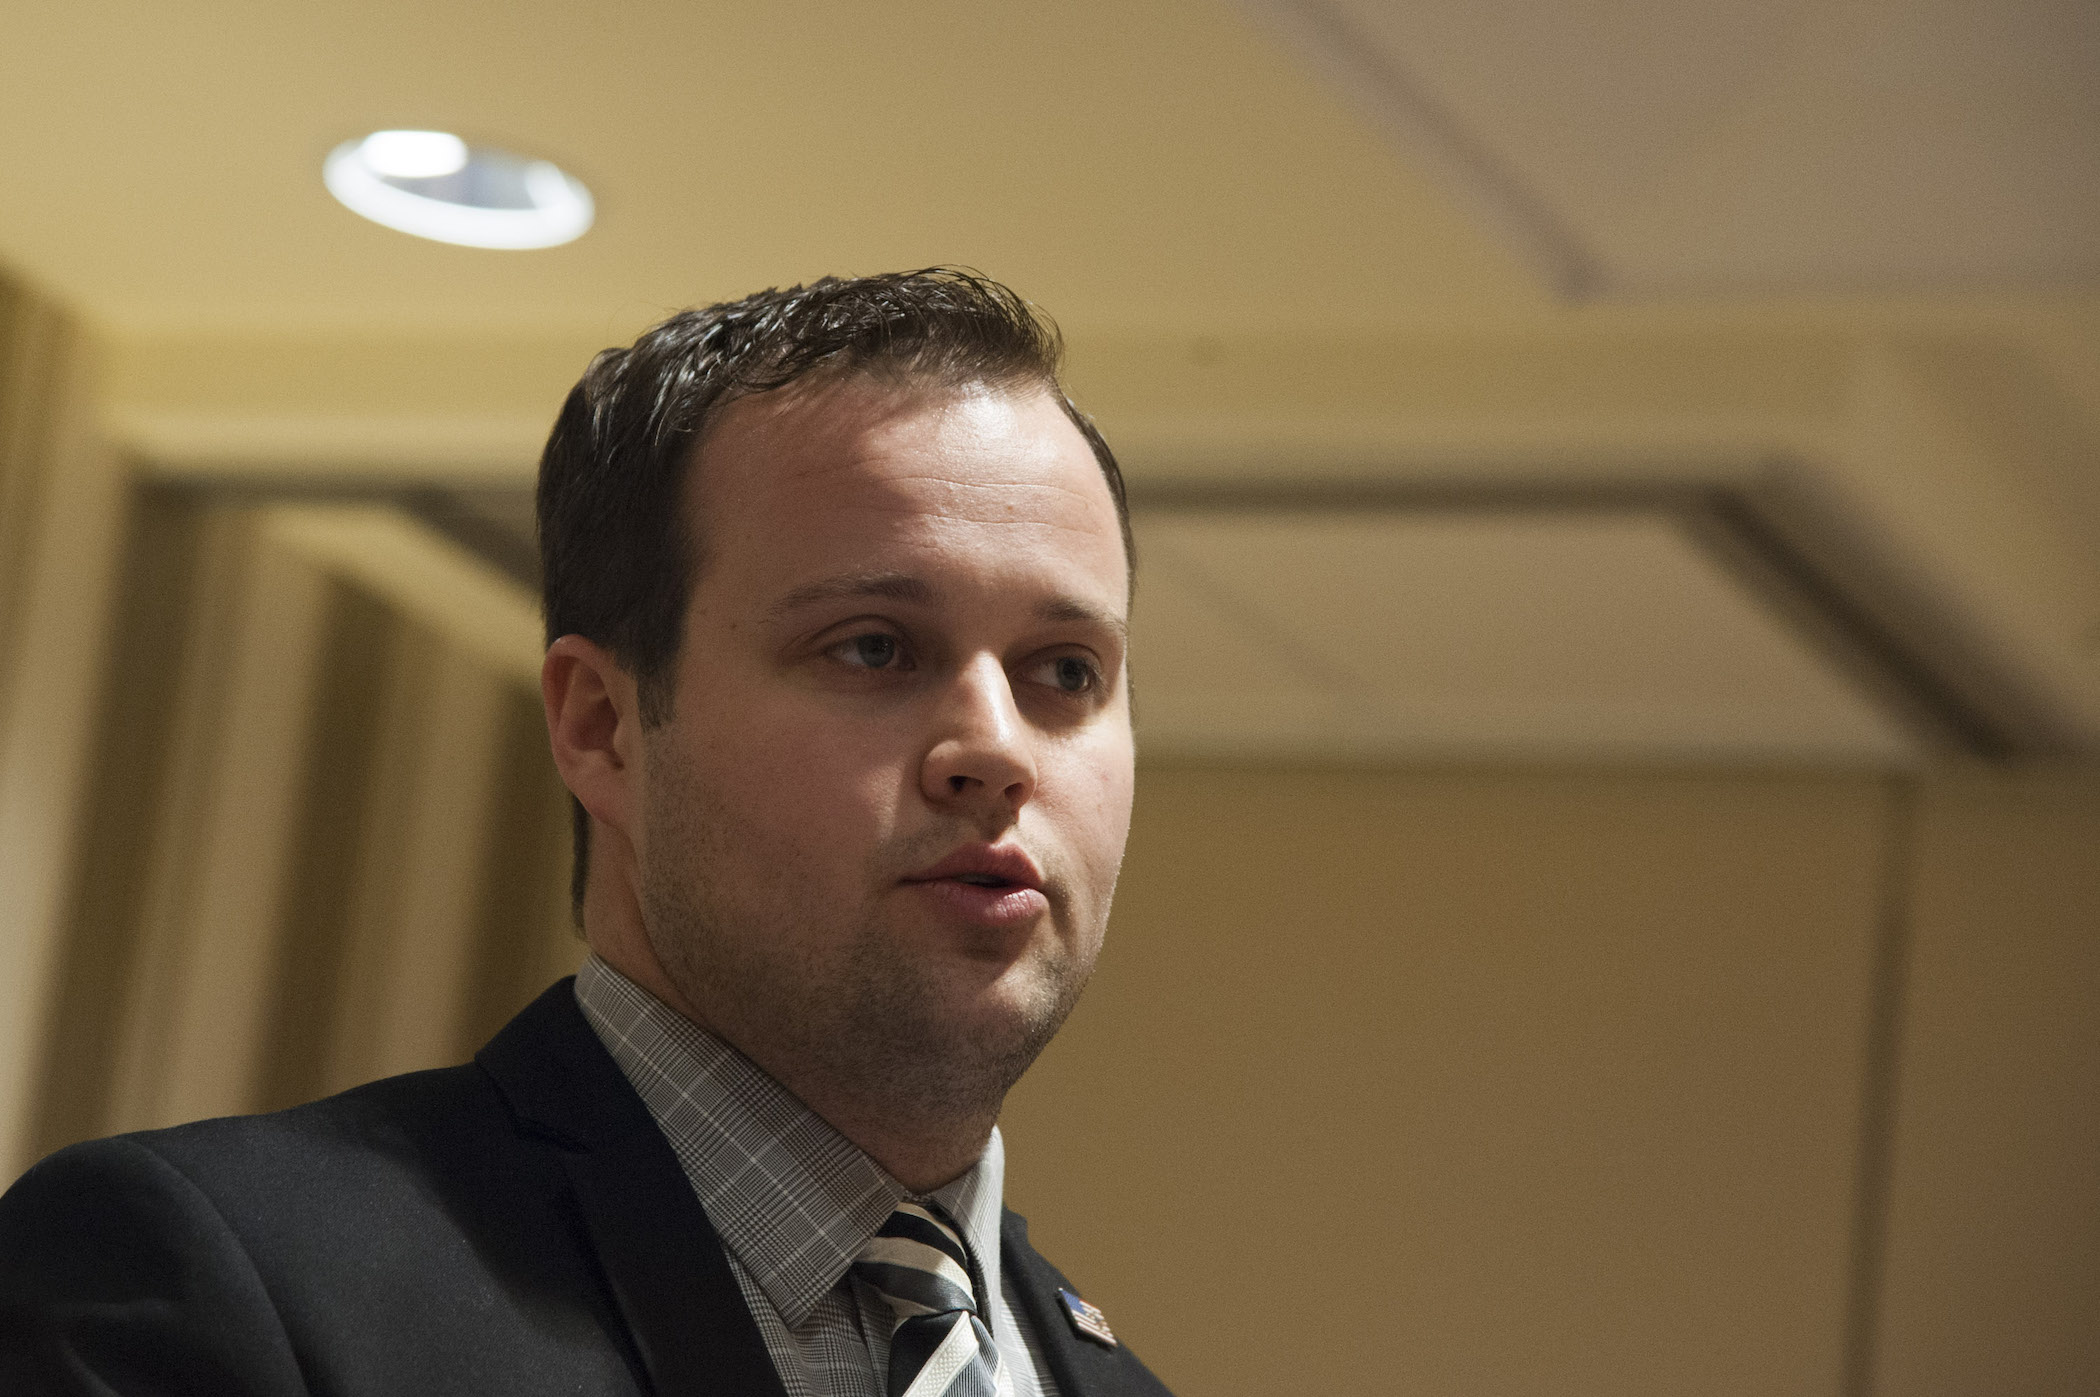 Josh Duggar, the oldest Duggar family sibling, speaks during the 42nd annual Conservative Political Action Conference (CPAC). Recent Josh Duggar news provides updates on his legal case